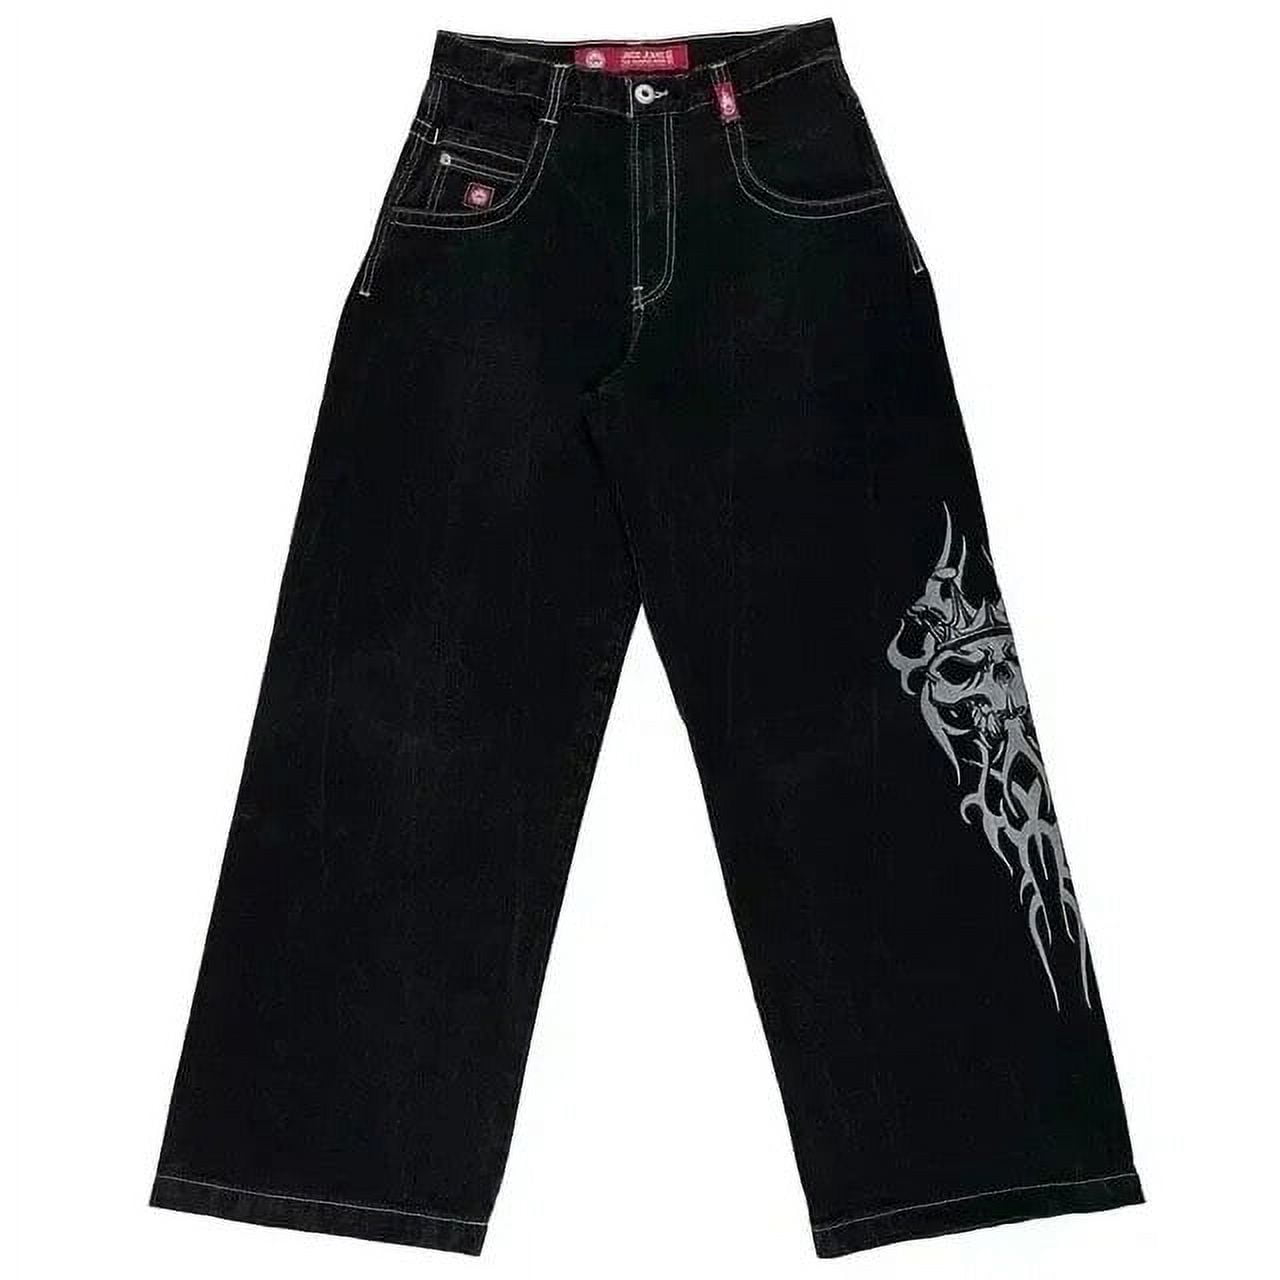 Y2K Baggy Jeans vintage JNCO high quality Embroidered pattern jeans Hip ...